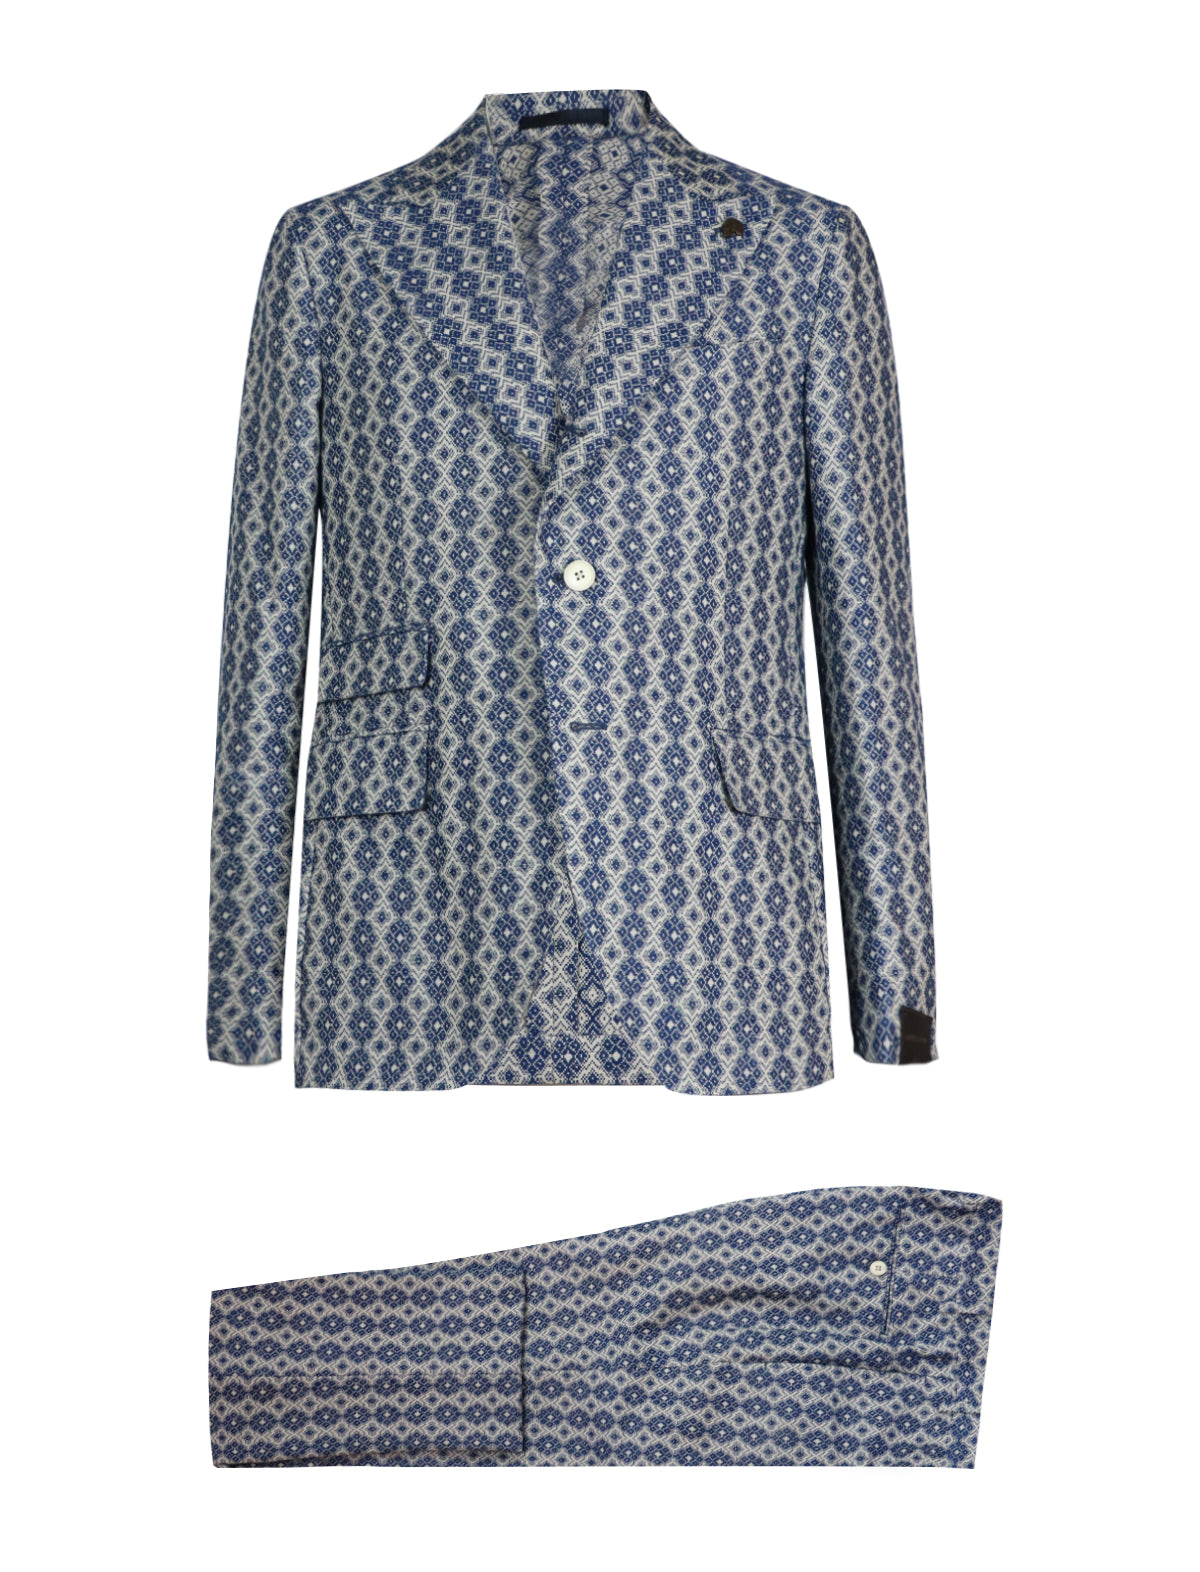 Gabriele Pasini Single-Breasted Patterned 2-Piece Suit Set in Blue